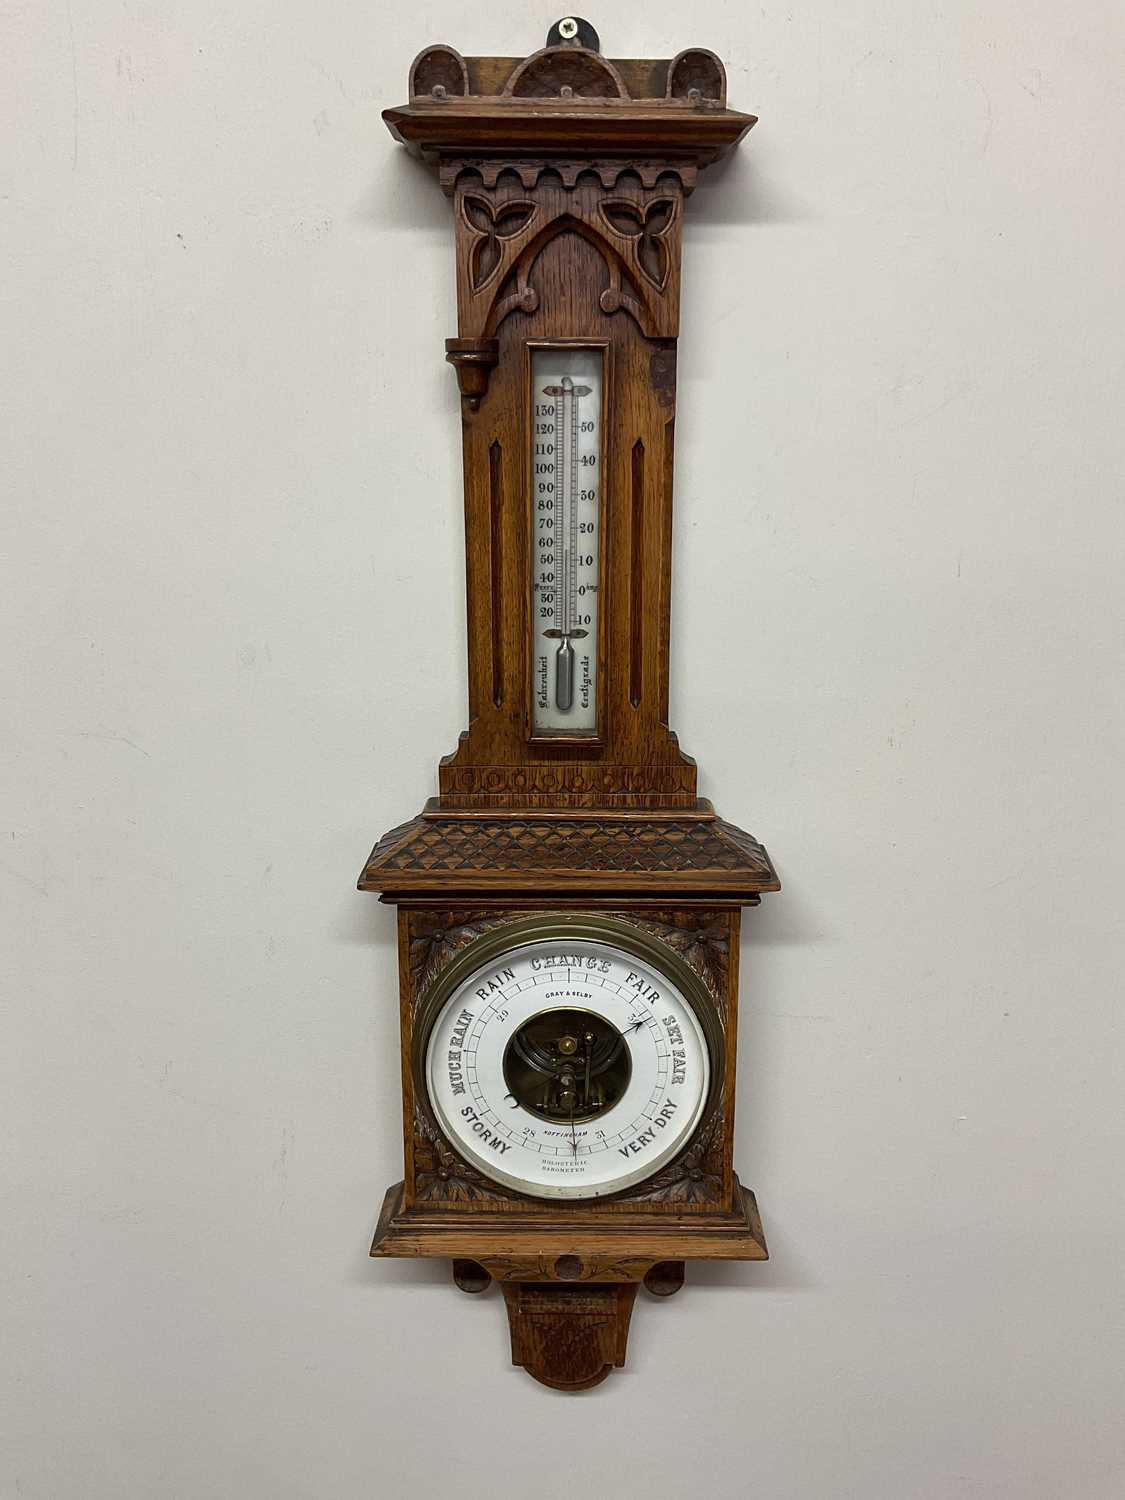 A Gray and Shelby Barometer; height 80 cm.